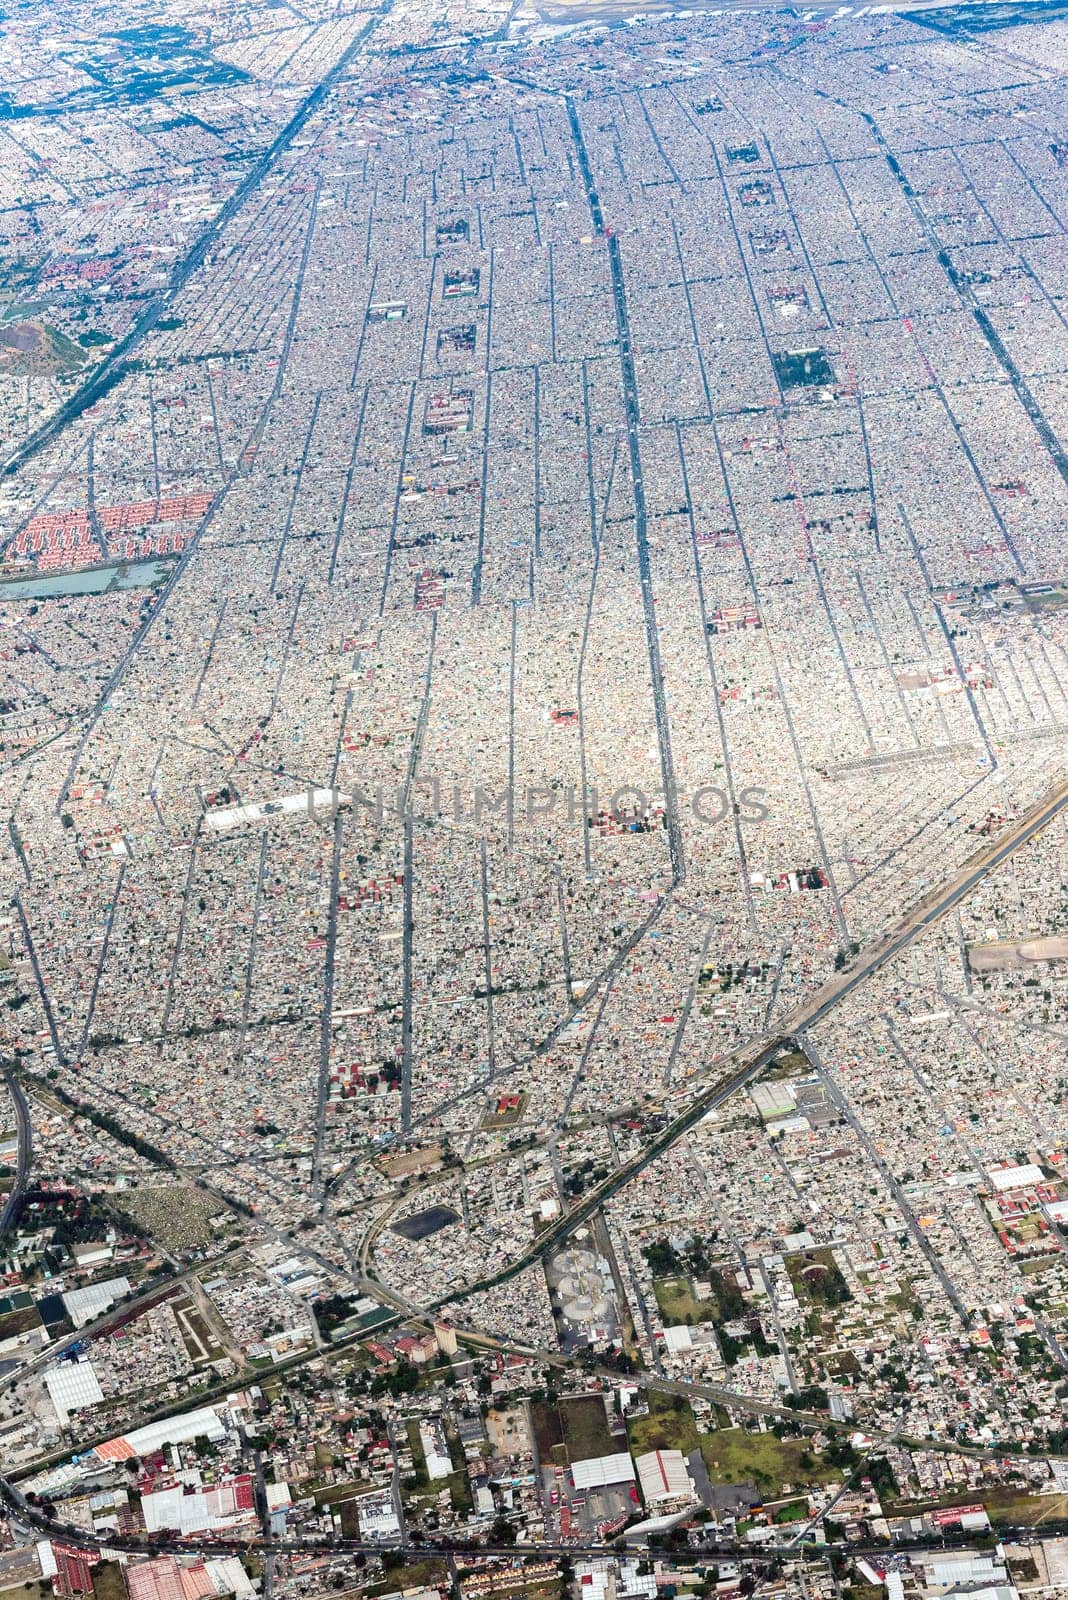 mexico city aerial view landscape from airplane